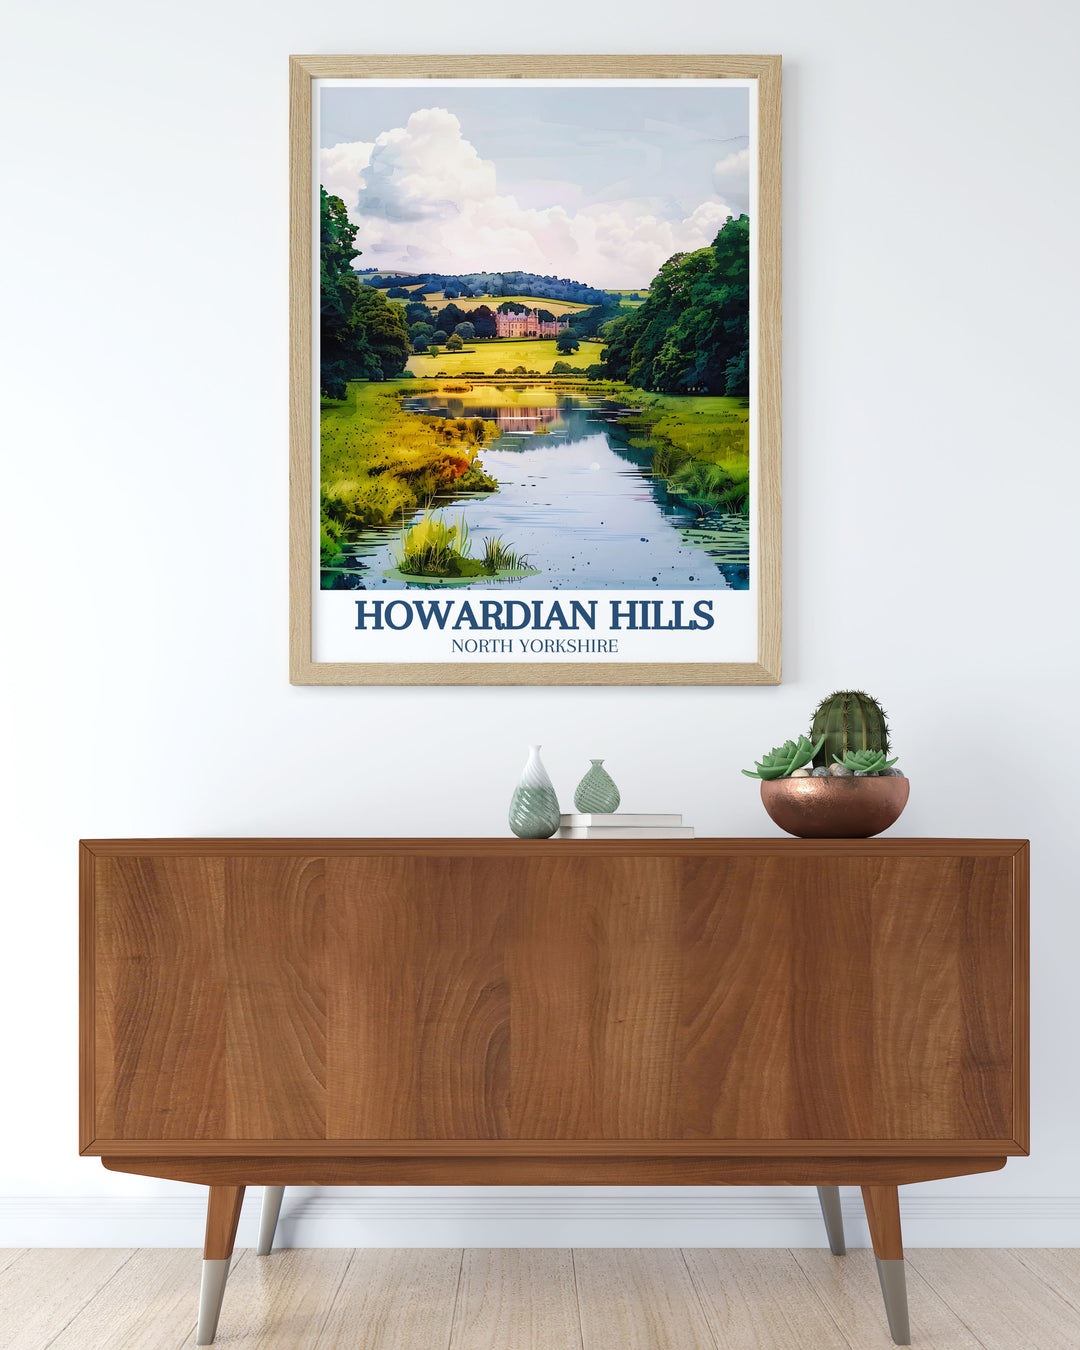 Canvas art of the River Derwent, illustrating the tranquil waters winding through the Howardian Hills. This artwork highlights the serene beauty of Yorkshires riverside landscapes, making it a perfect addition to any nature themed decor.